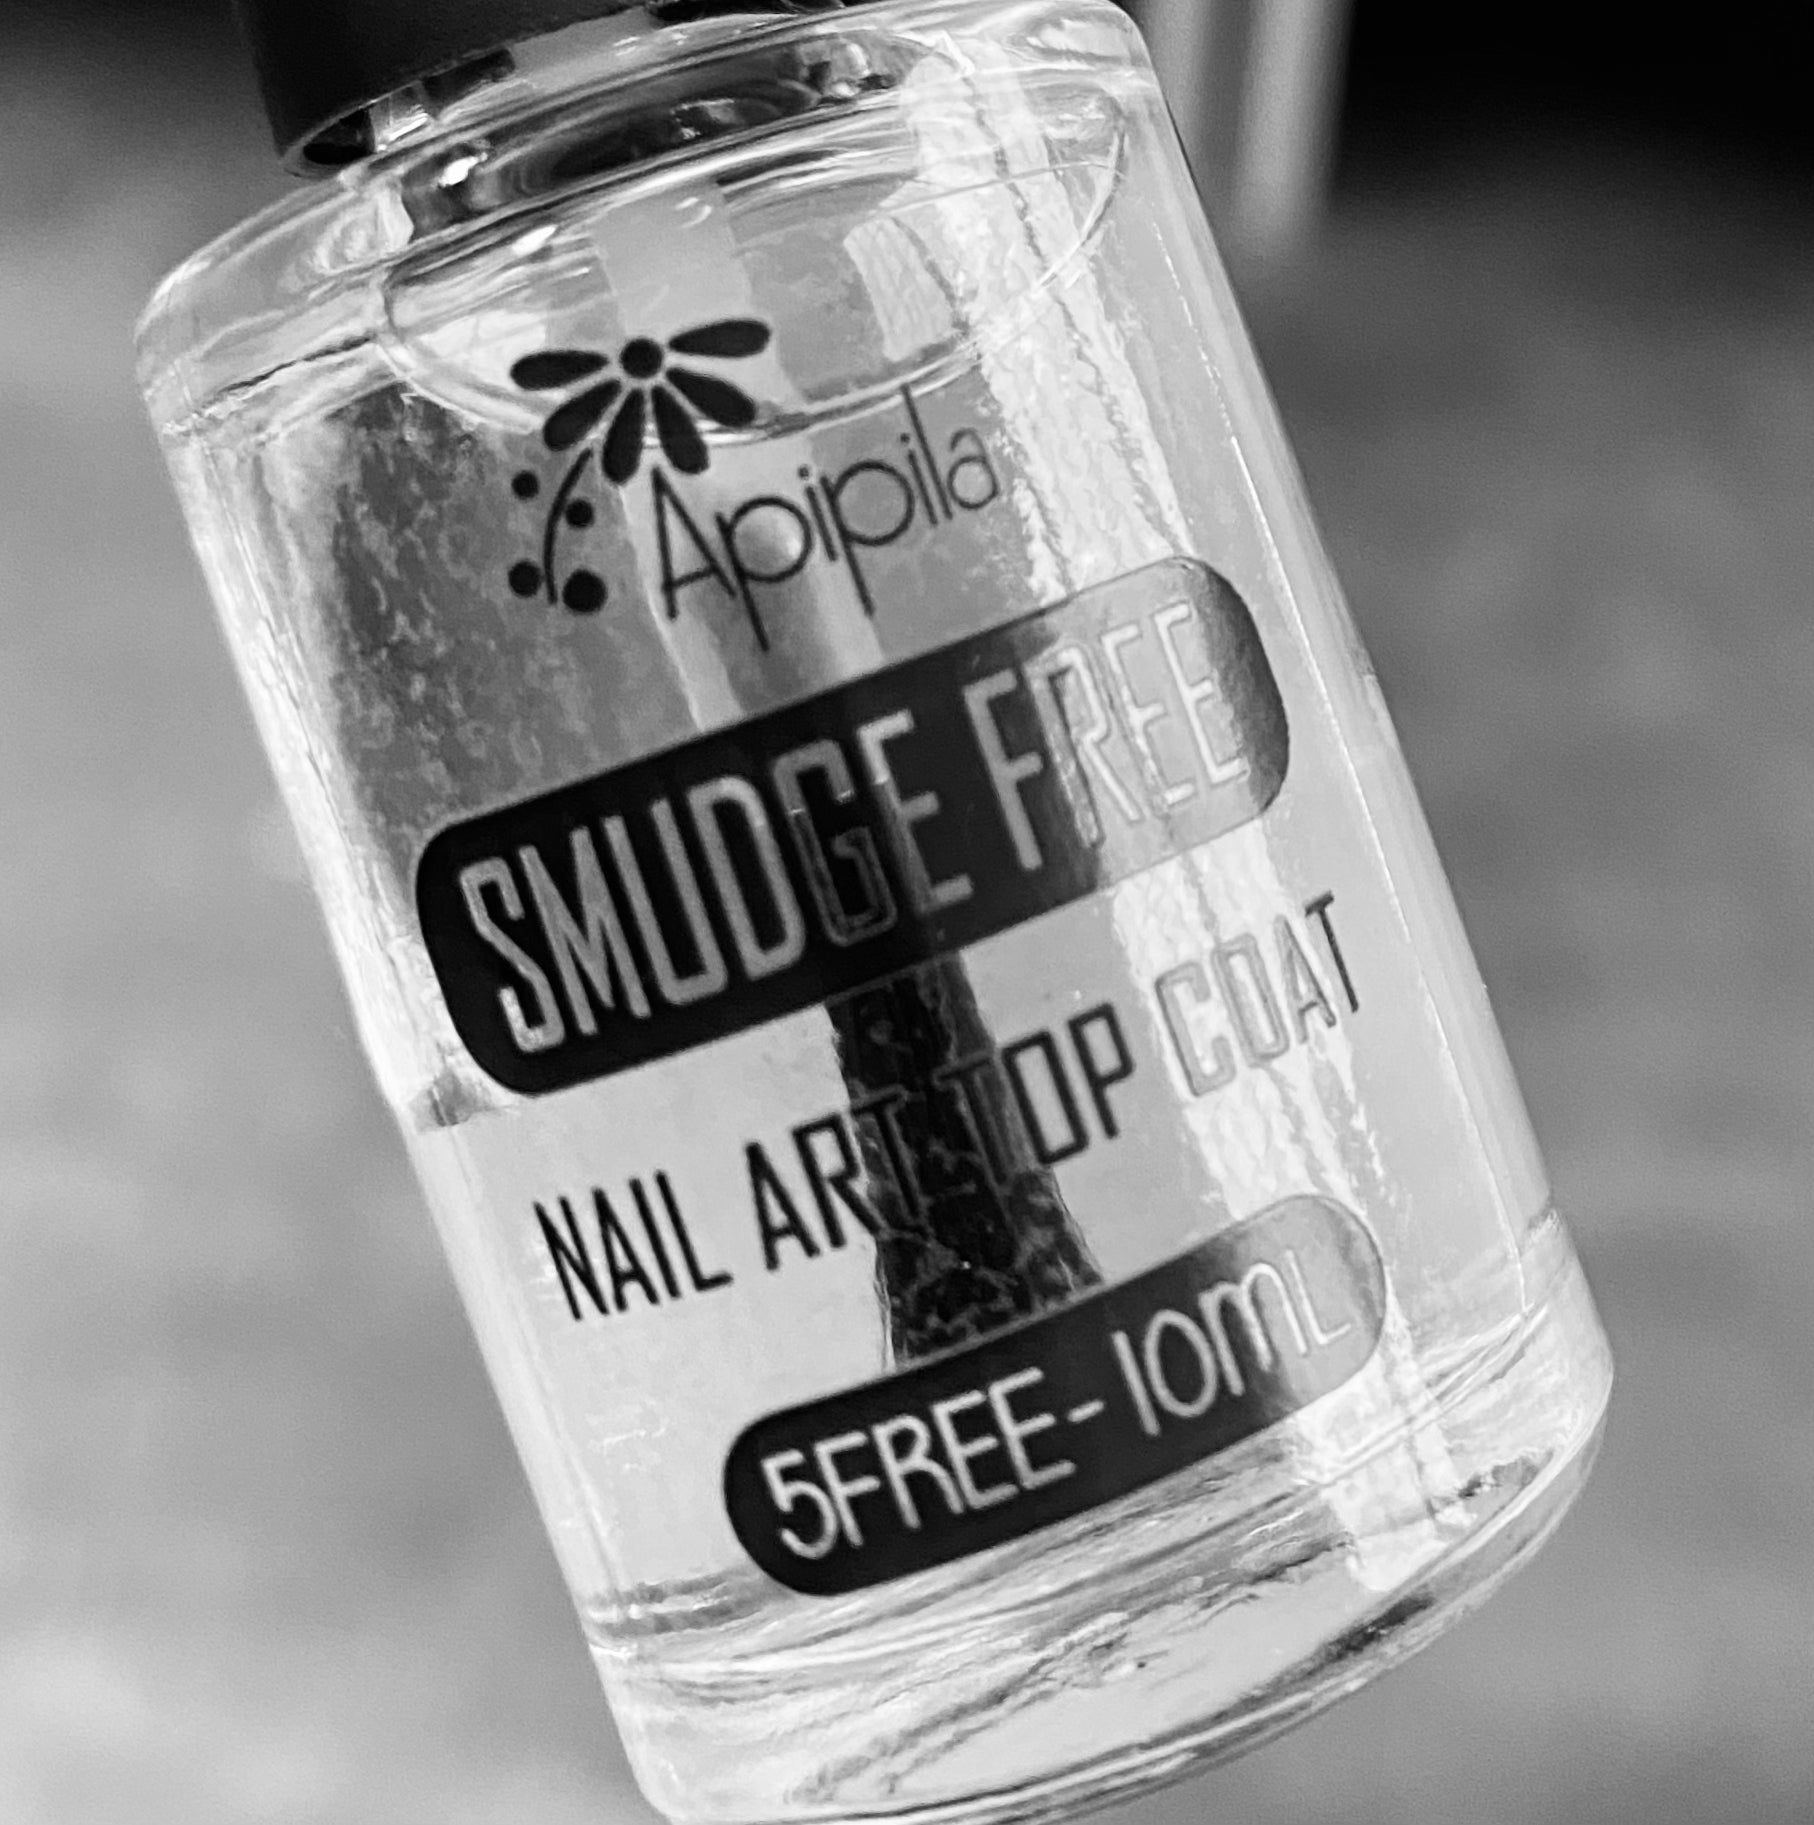 Smudge Free Nail Art Top Coat by Apipila